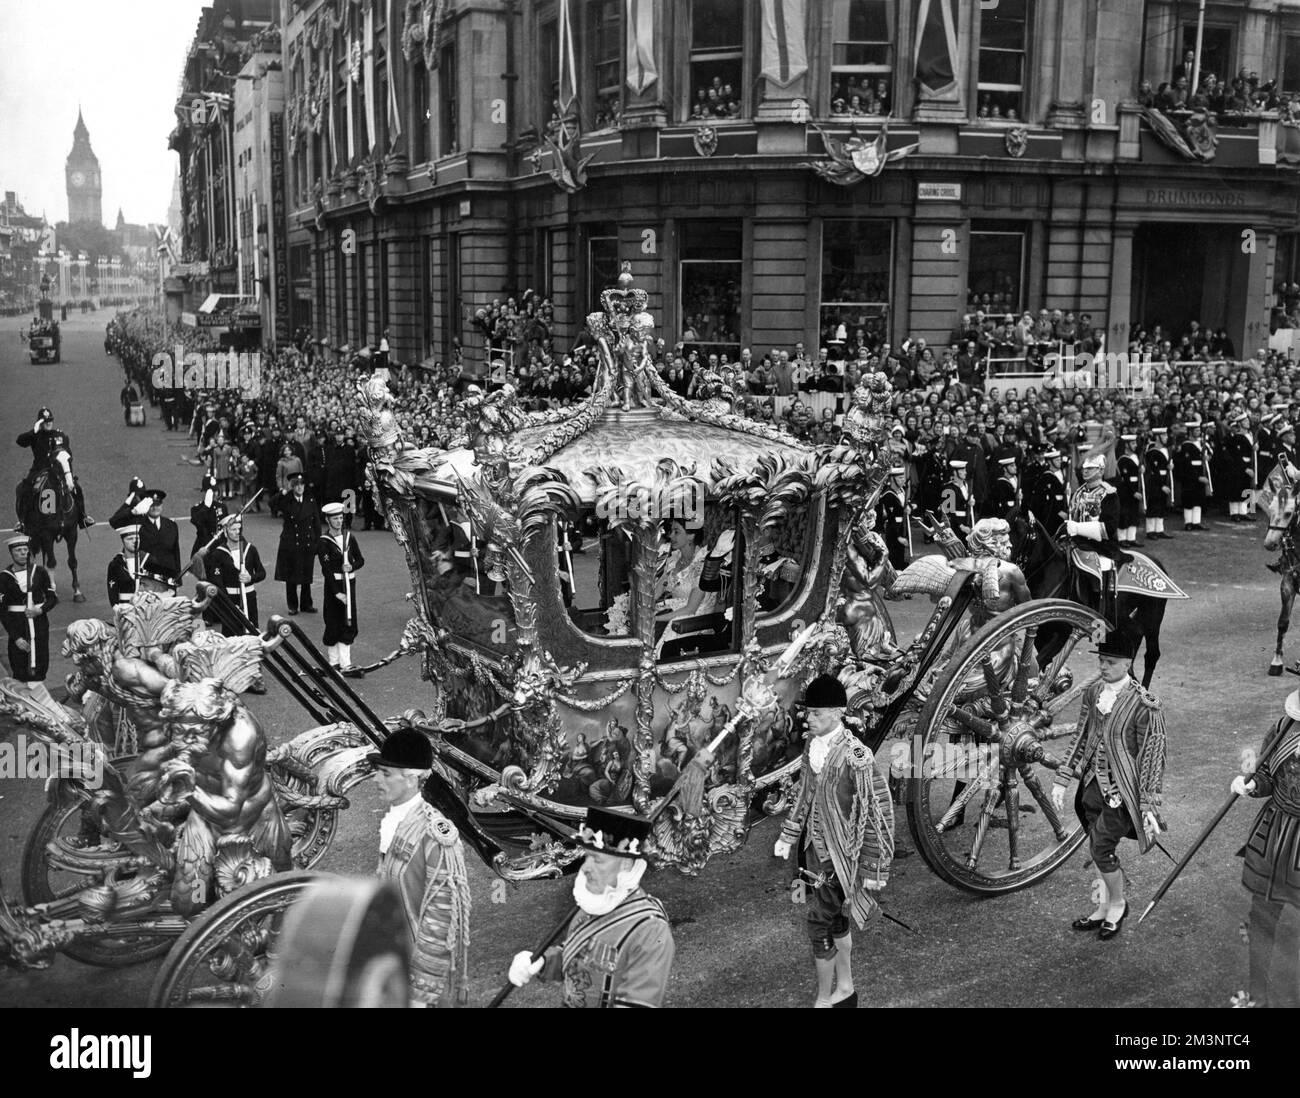 Queen Elizabeth II drives through Trafalgar Square in central London in the golden State coach on the way to Westminster Abbey for her Coronation on 2 June 1953.       Date: 1953 Stock Photo